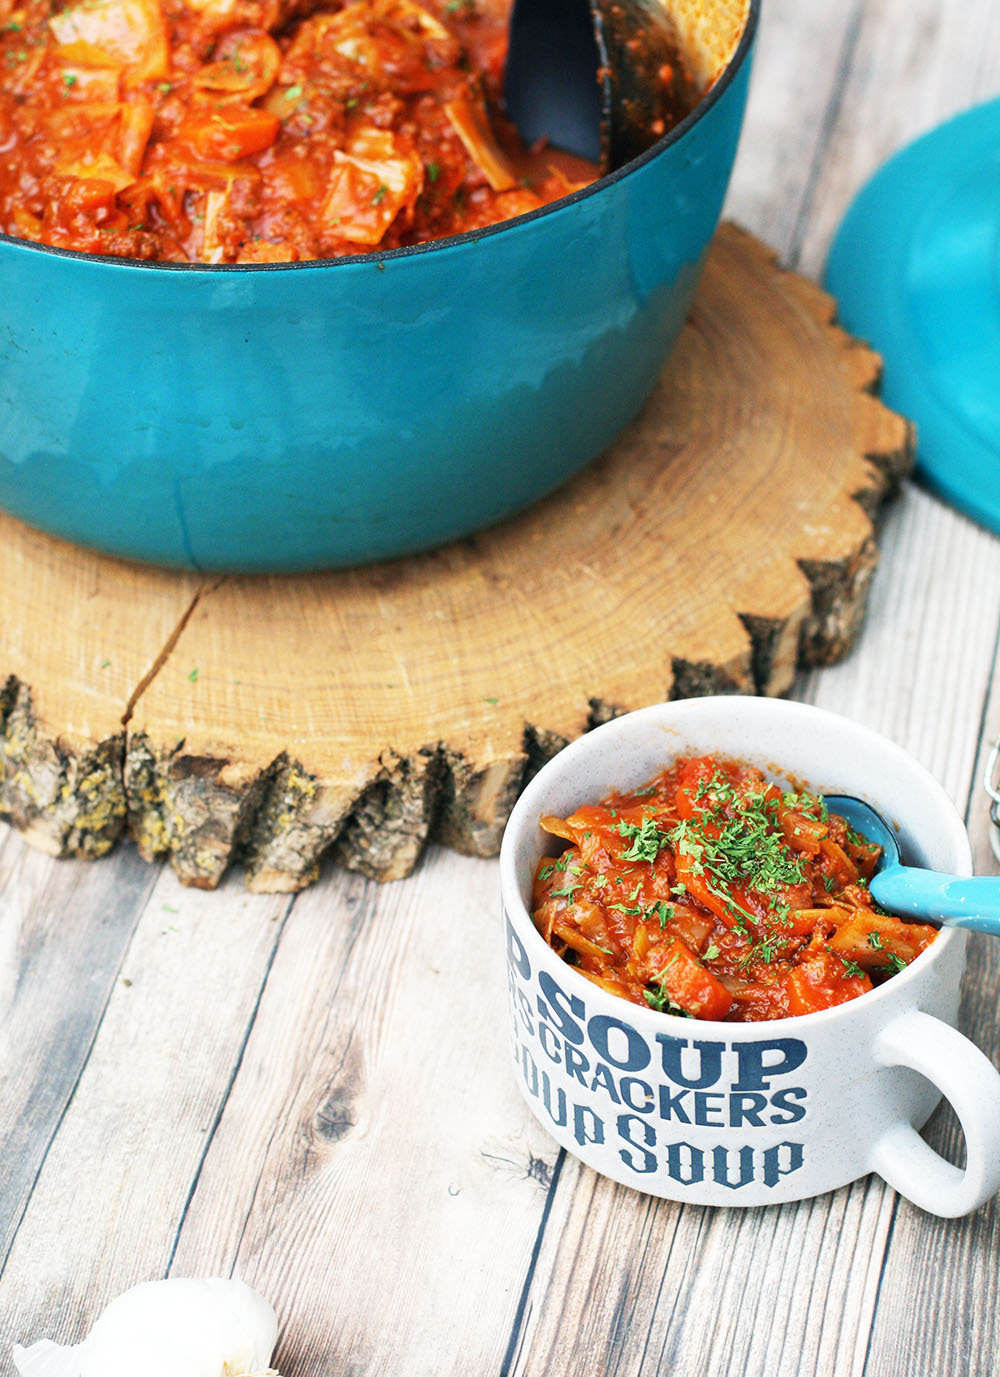 Cabbage roll soup: All the flavors of cabbage rolls, in soup form. And it's paleo-friendly!